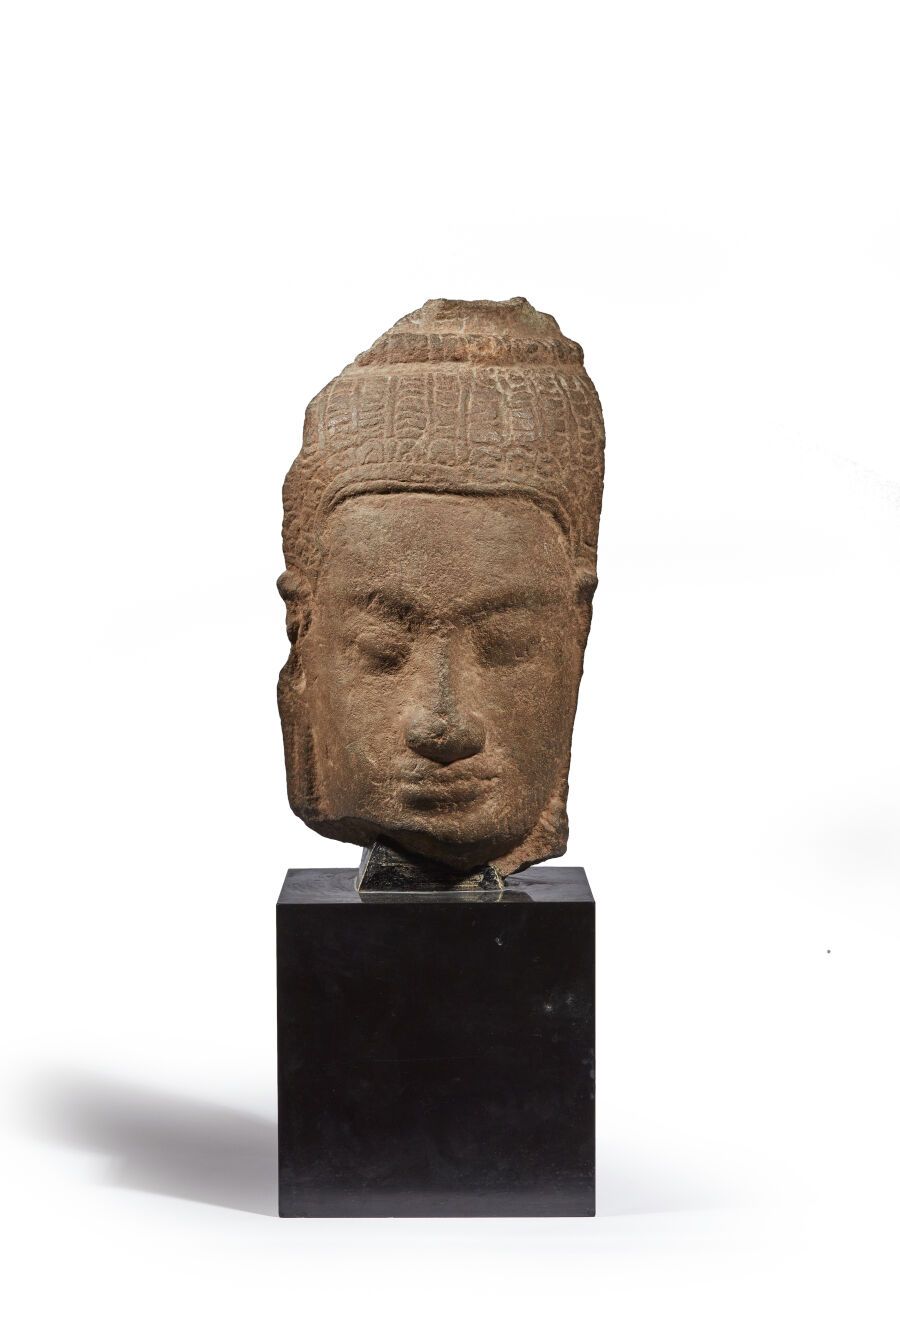 Null CAMBODIA - Khmer period, BAYON, 12th-13th centuries
Fragment of a Buddha's &hellip;